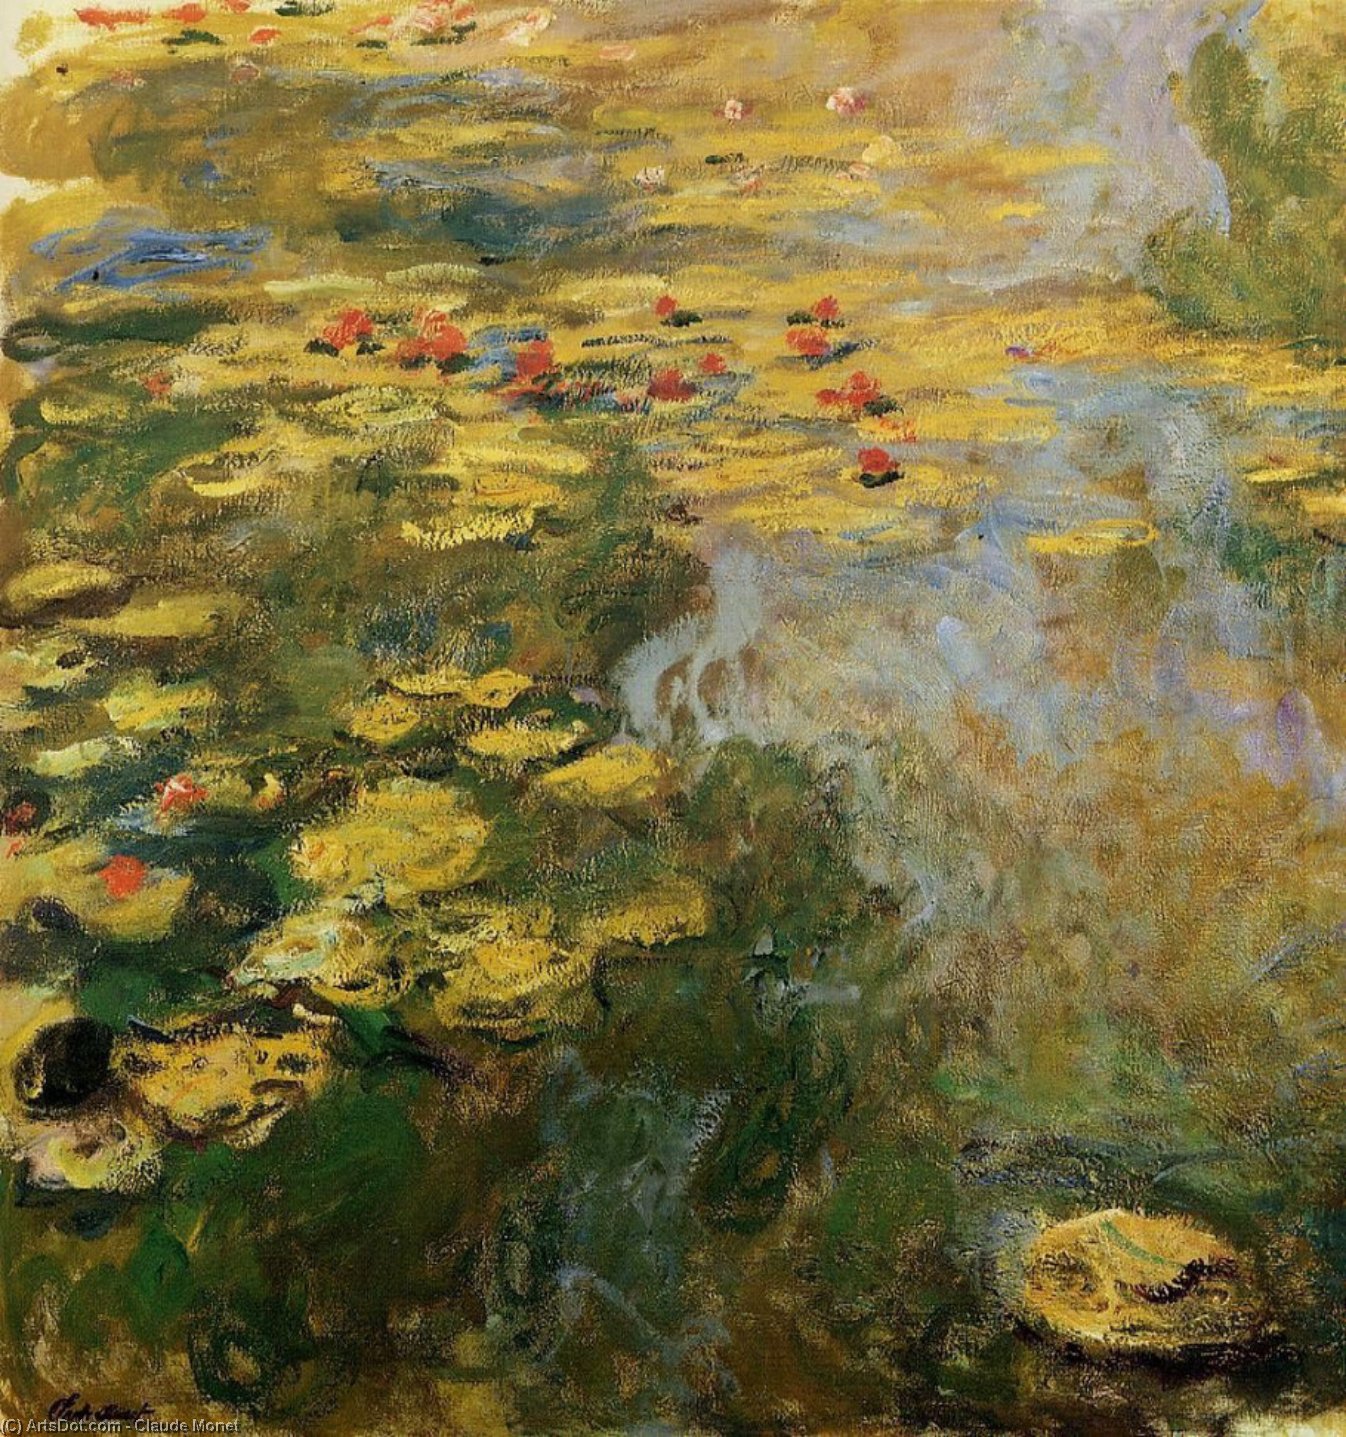 Buy Museum Art Reproductions The Water-Lily Pond (left side), 1917 by Claude Monet (1840-1926, France) | ArtsDot.com